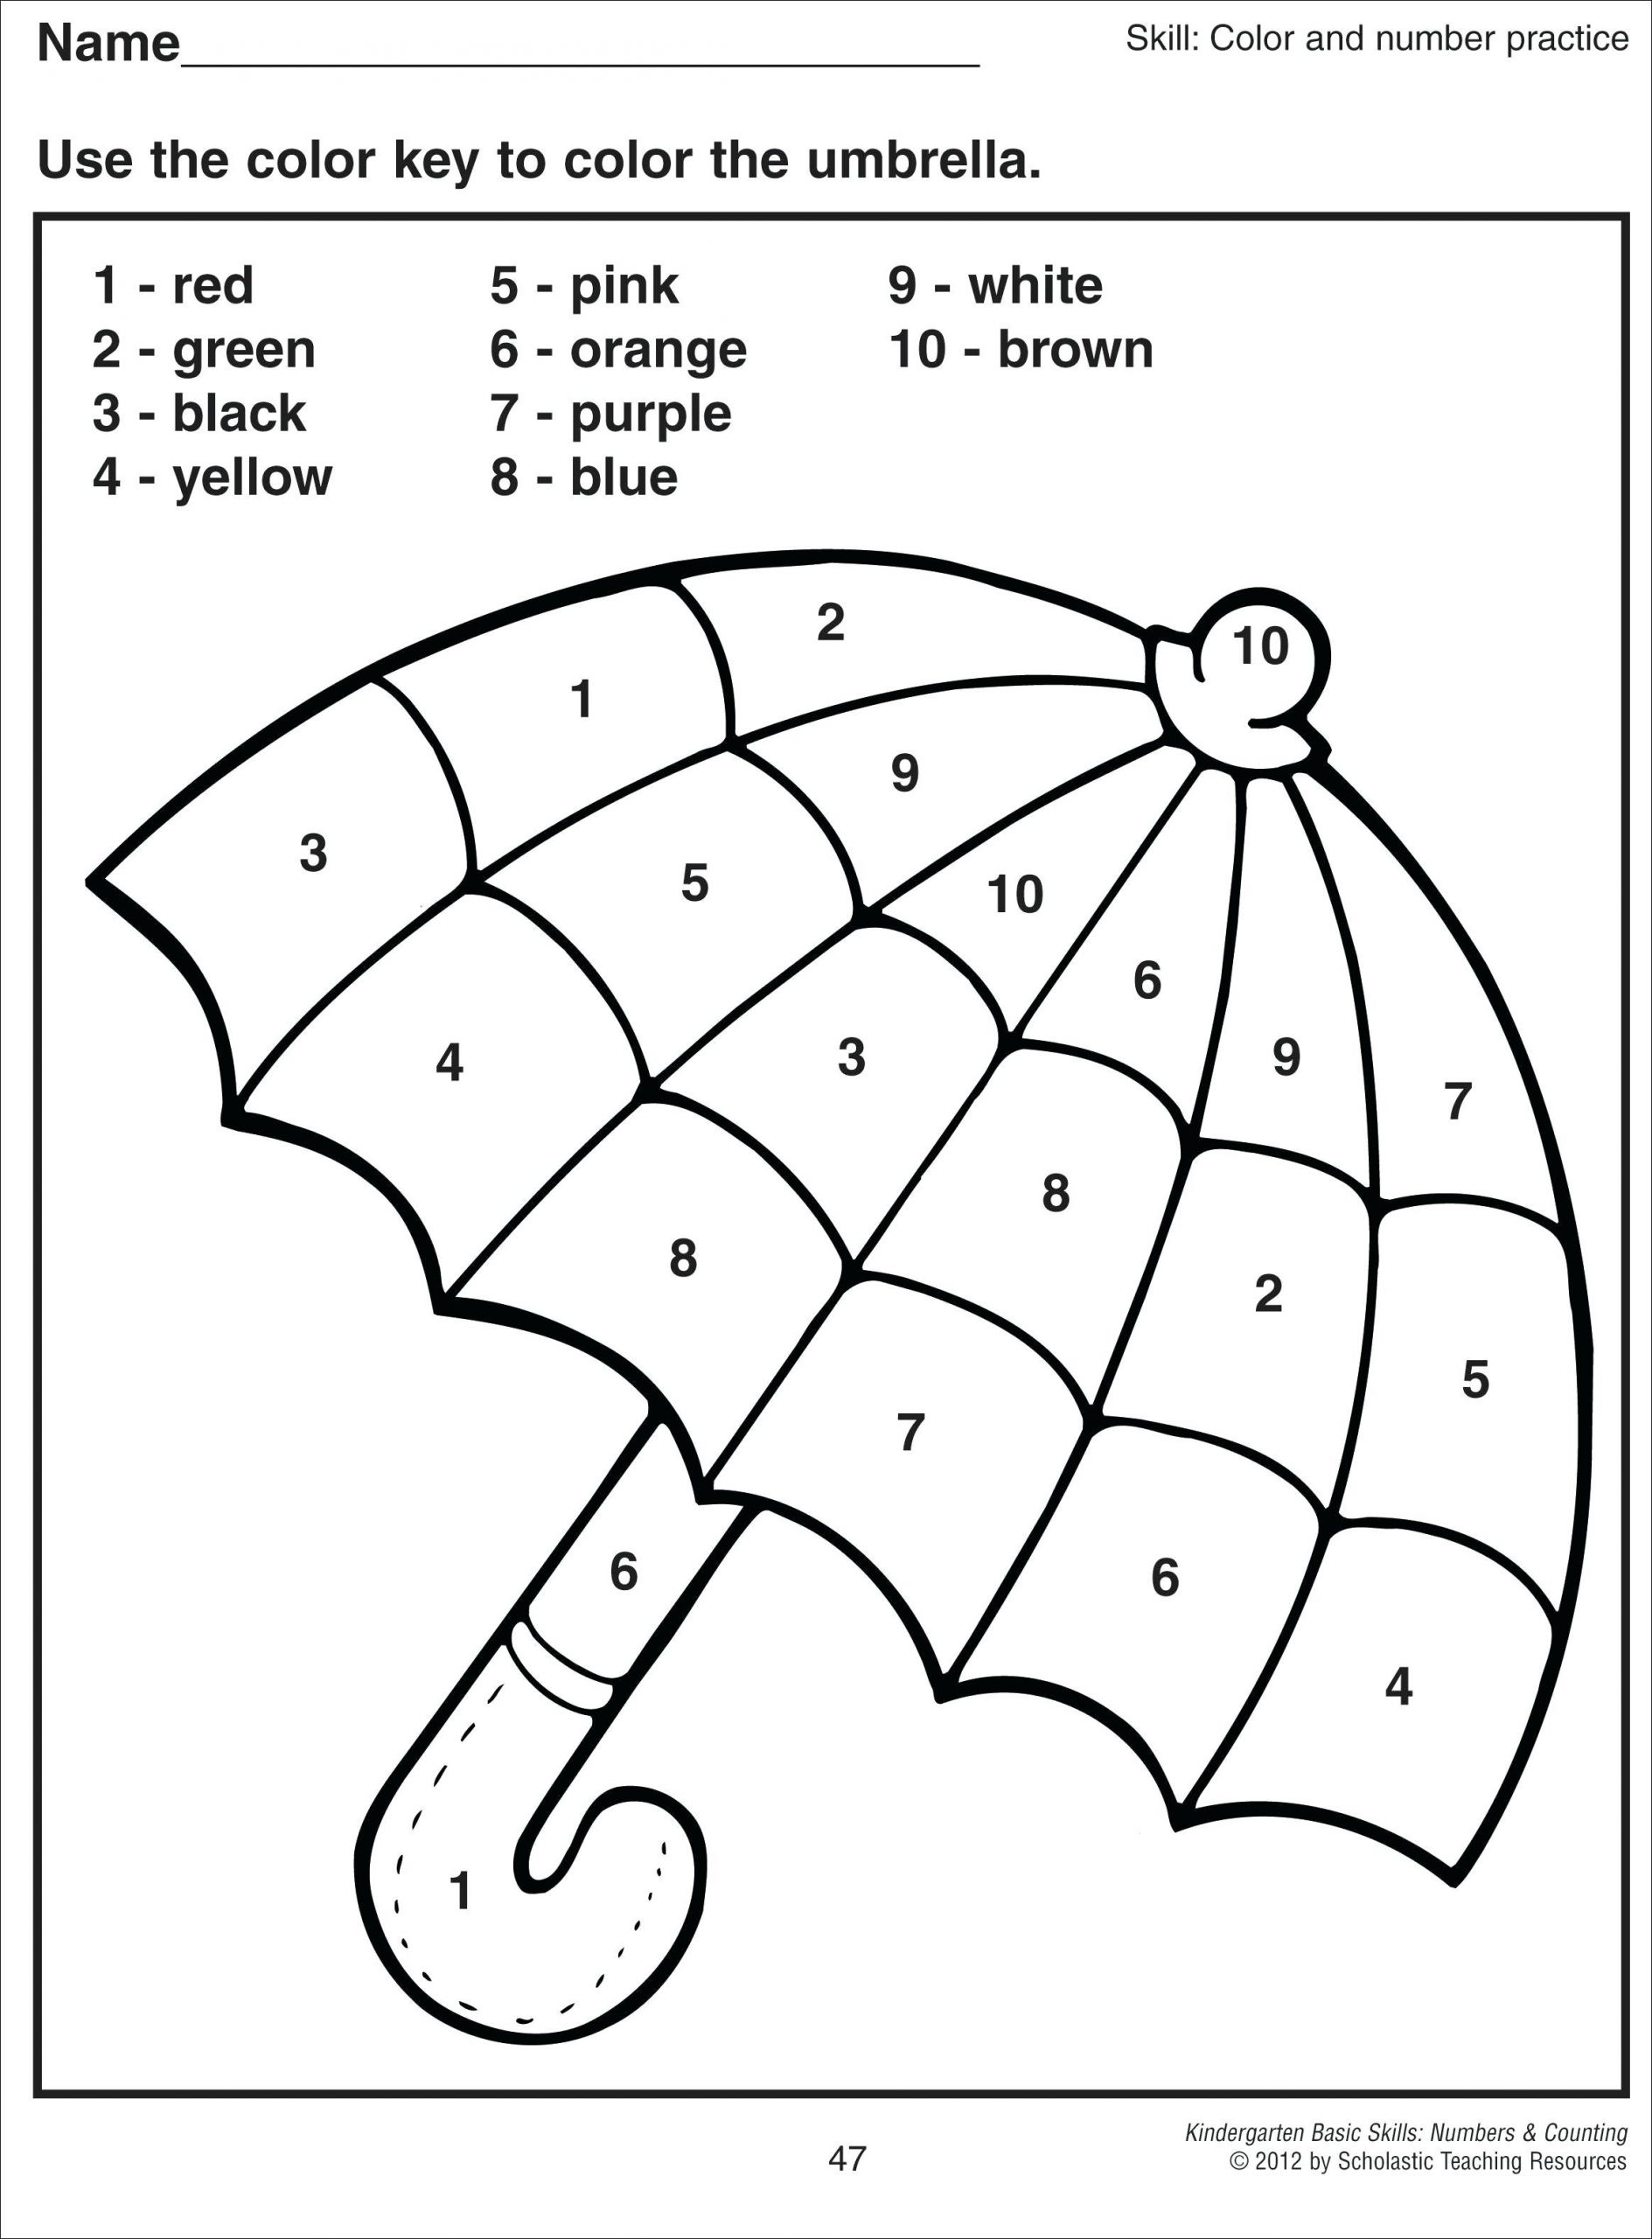 Free Math Worksheets Second Grade 2 Skip Counting Skip Counting by 10 From 1 10